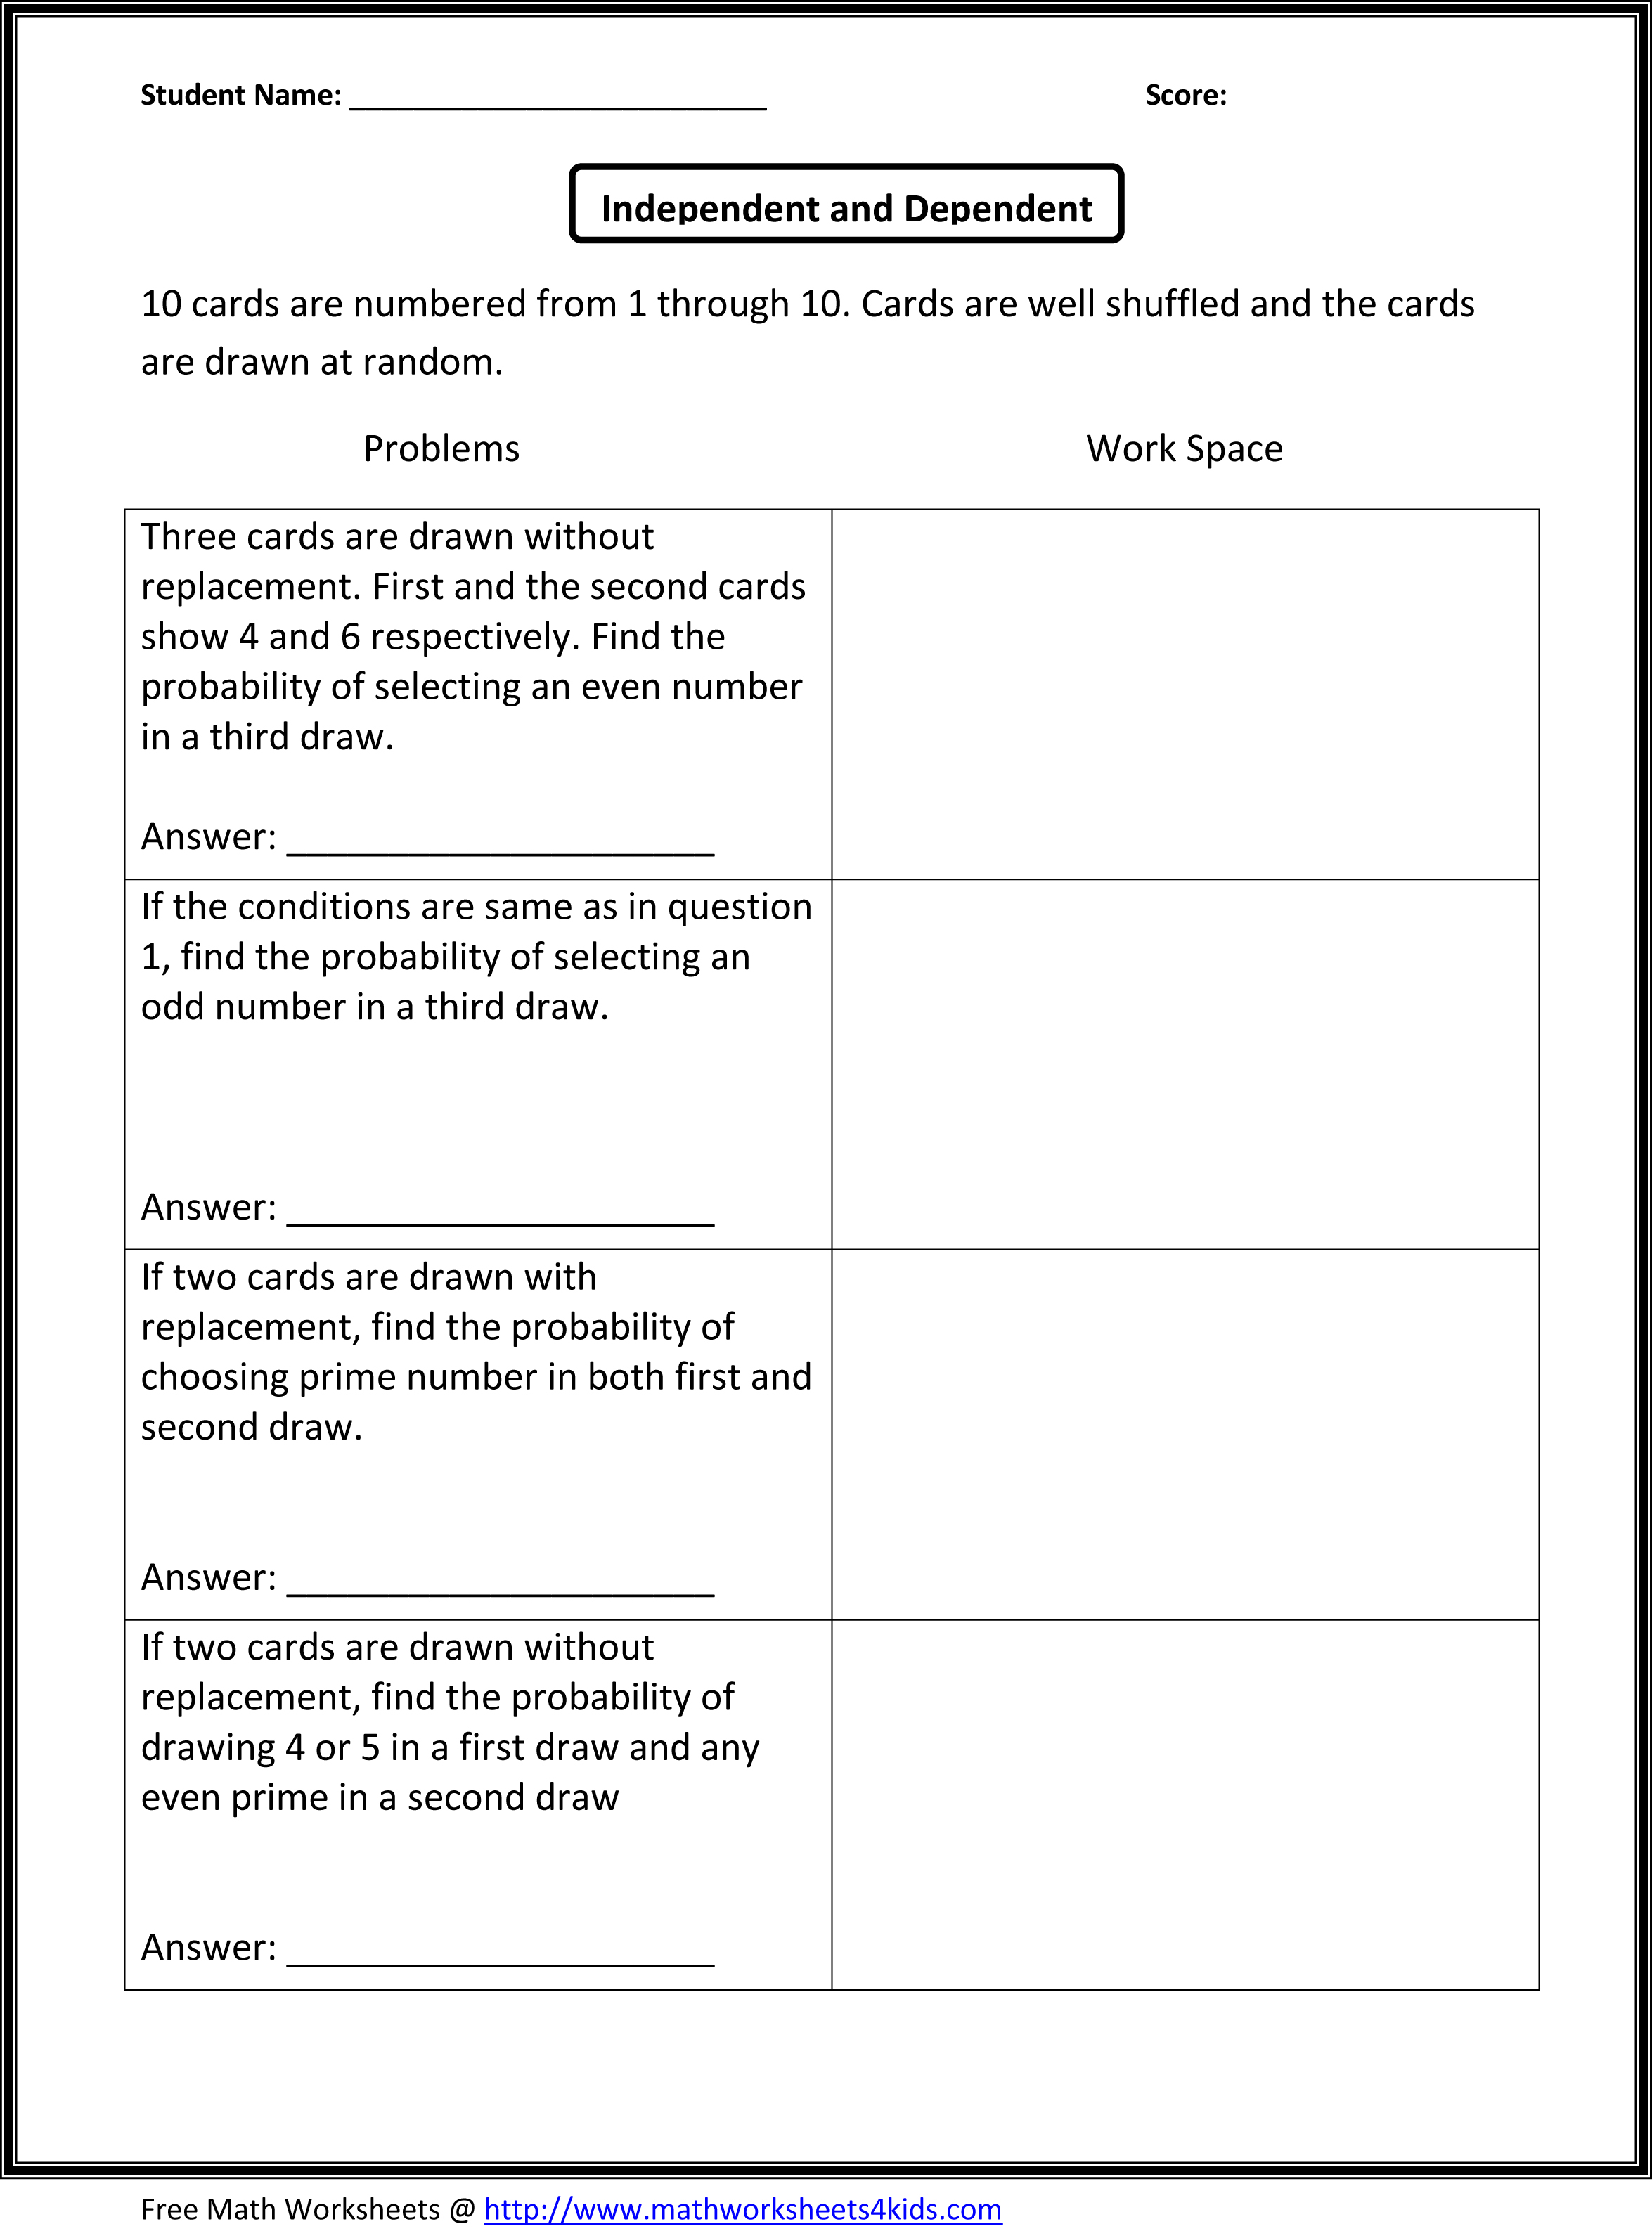 9th-grade-worksheet-category-page-2-worksheeto